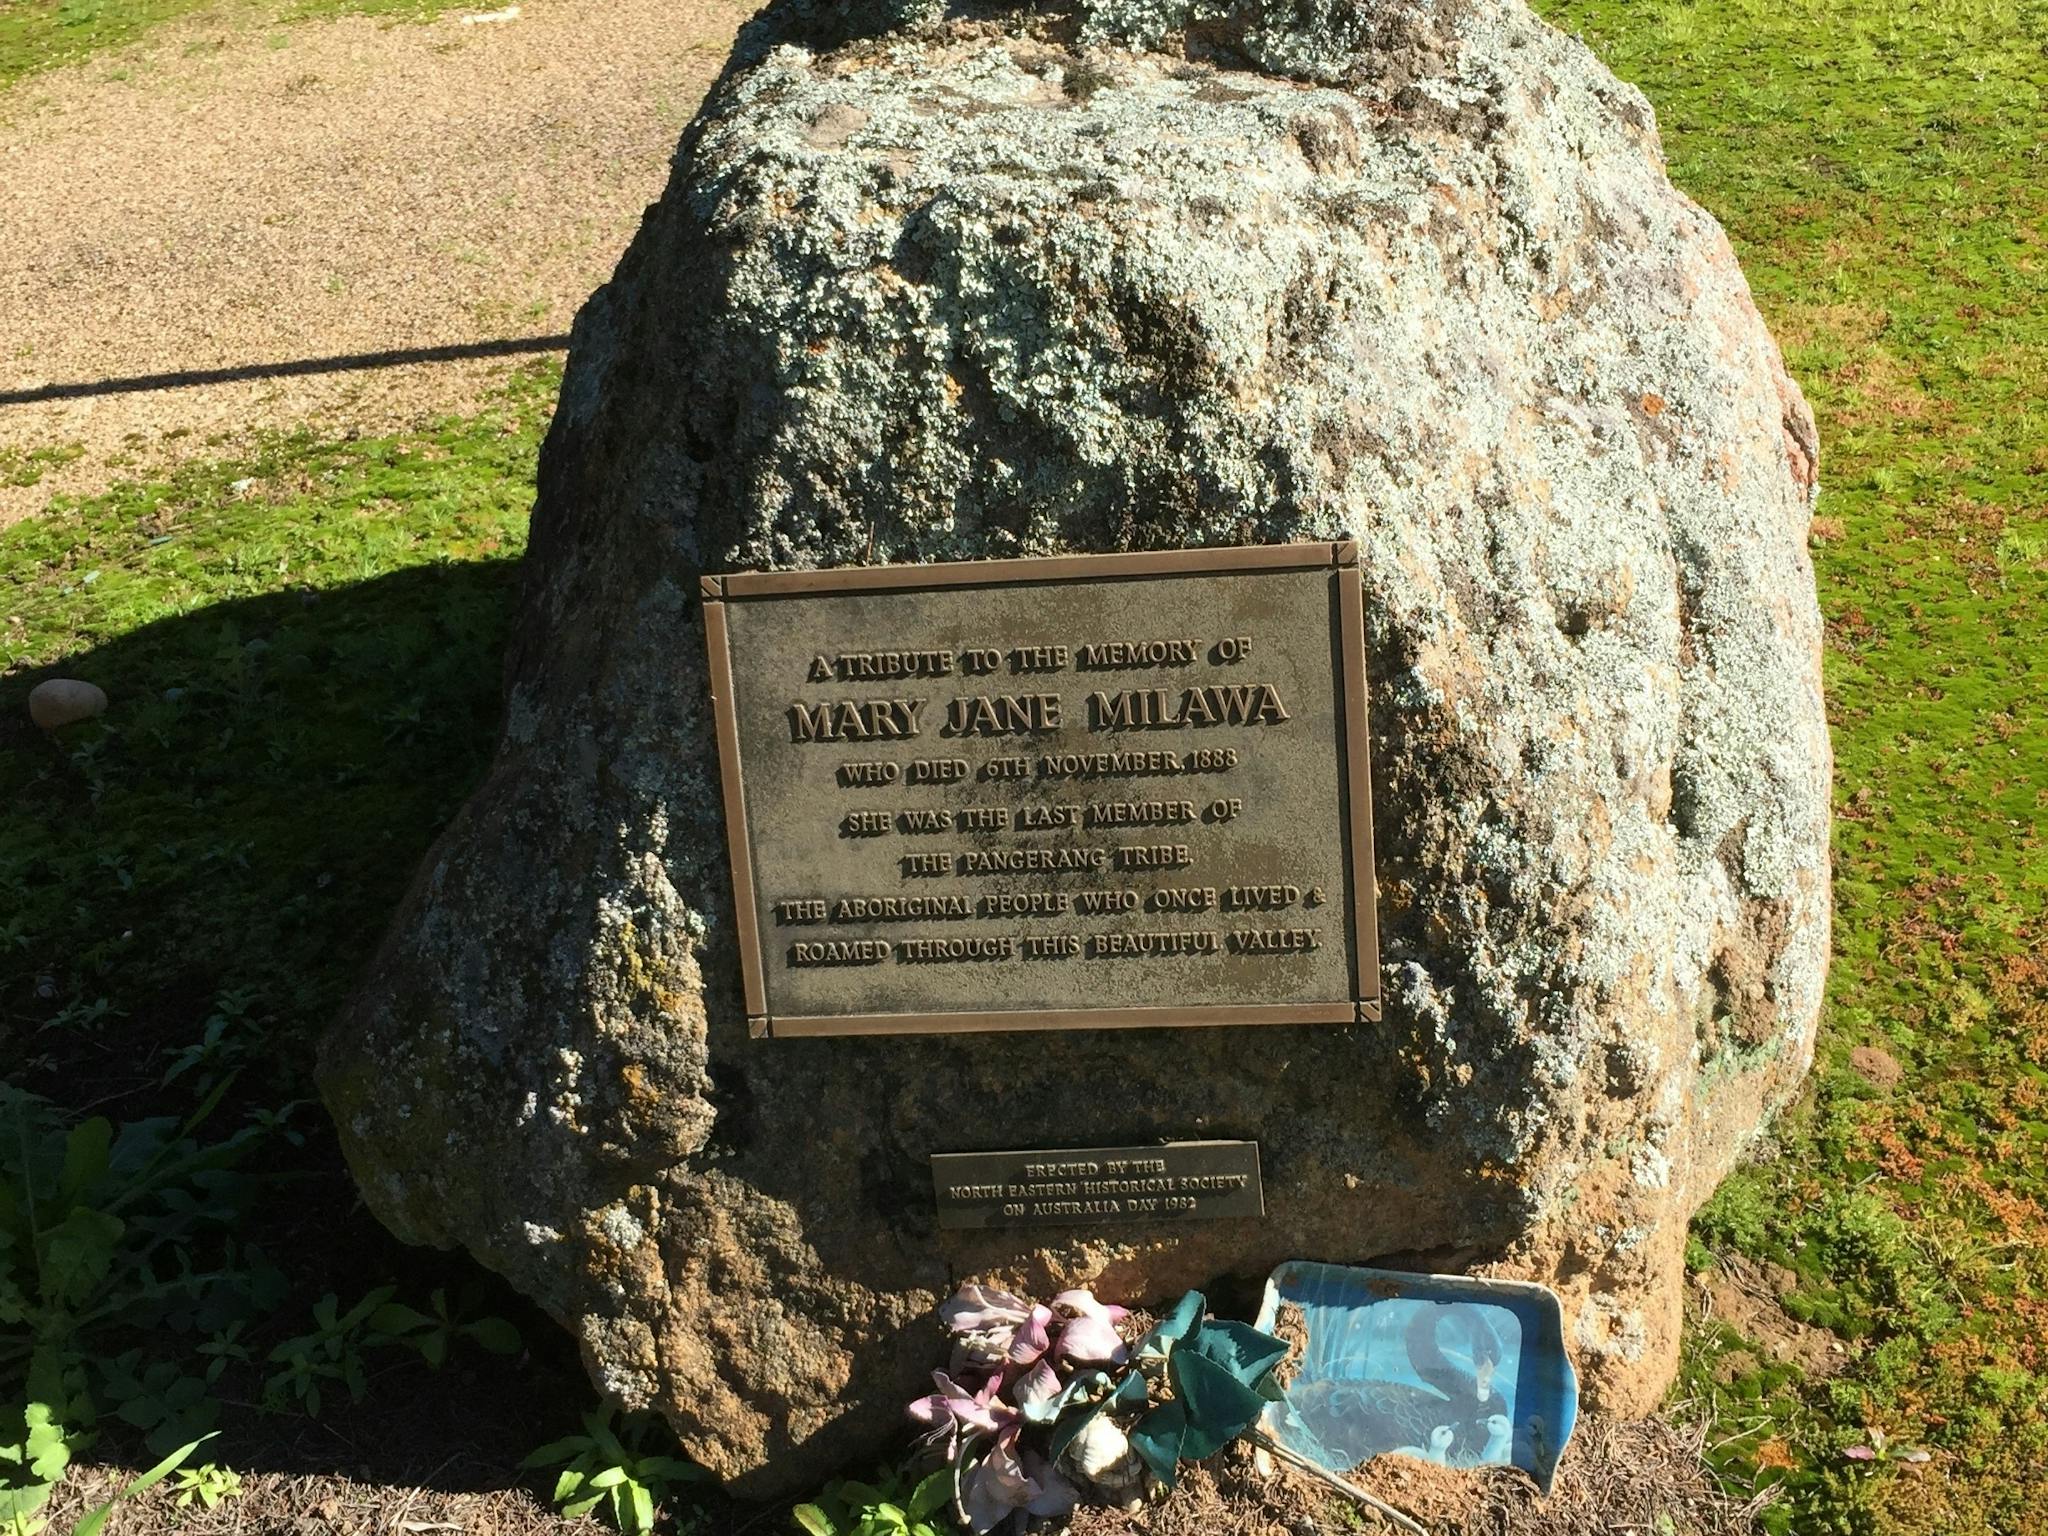 Rock with memorial plaque to Mary Jane Milawa the last member of the bpangerang tribe